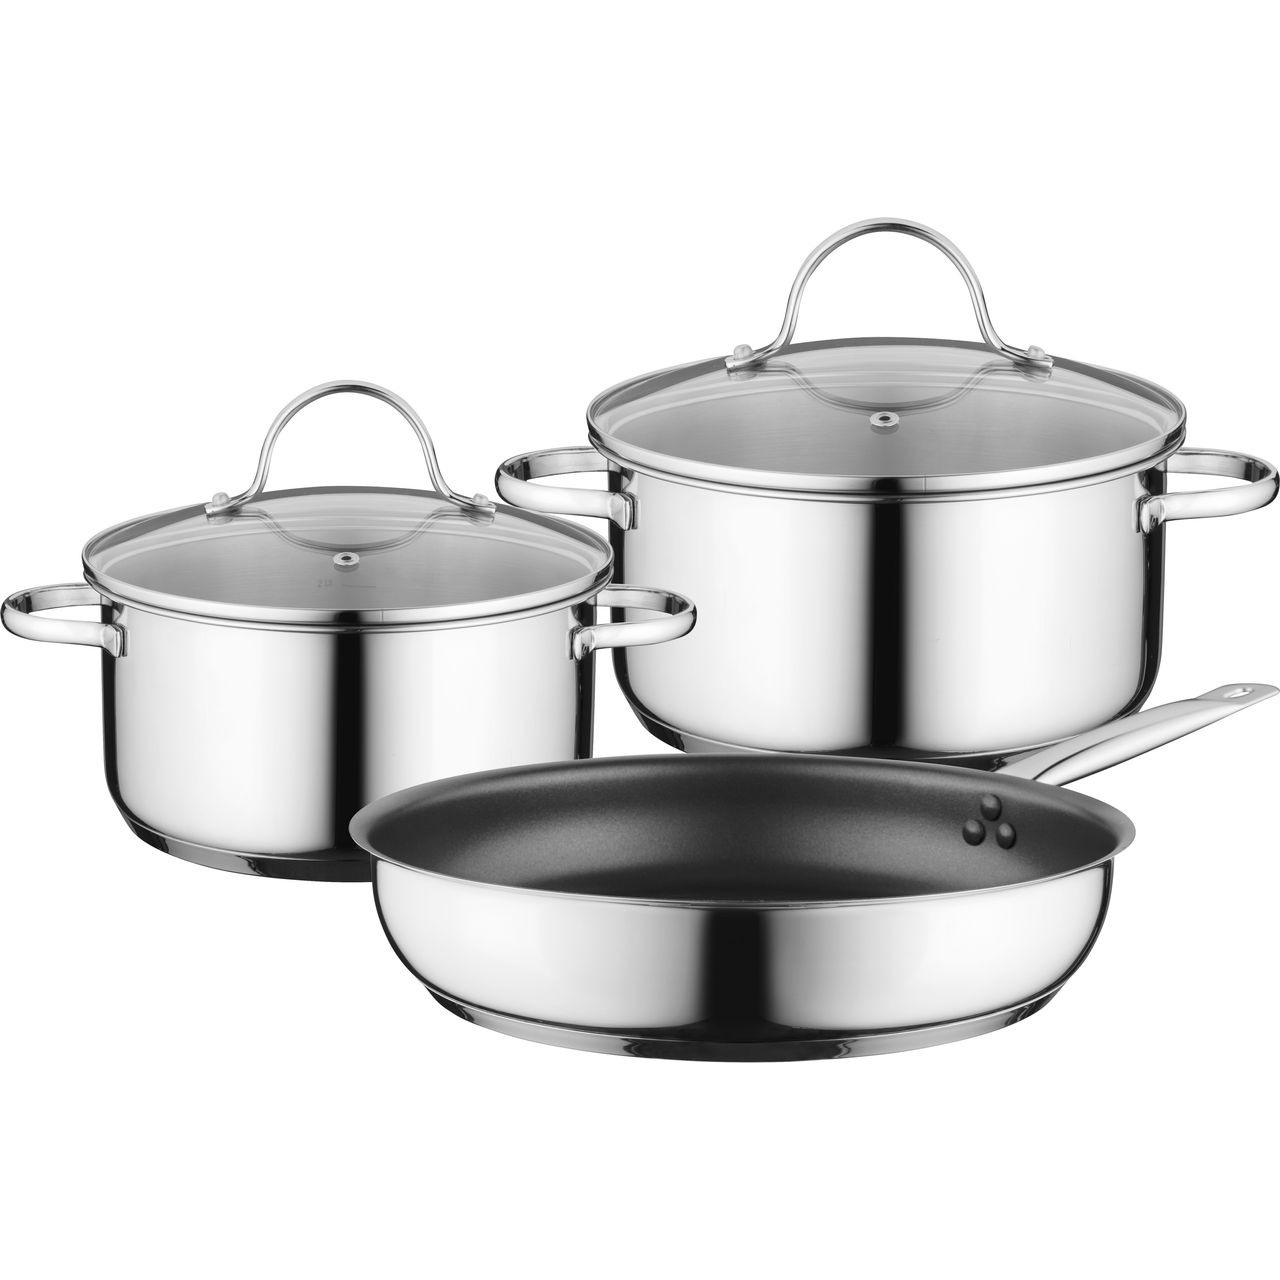 00576026 Pan Set (For Induction Cooking)